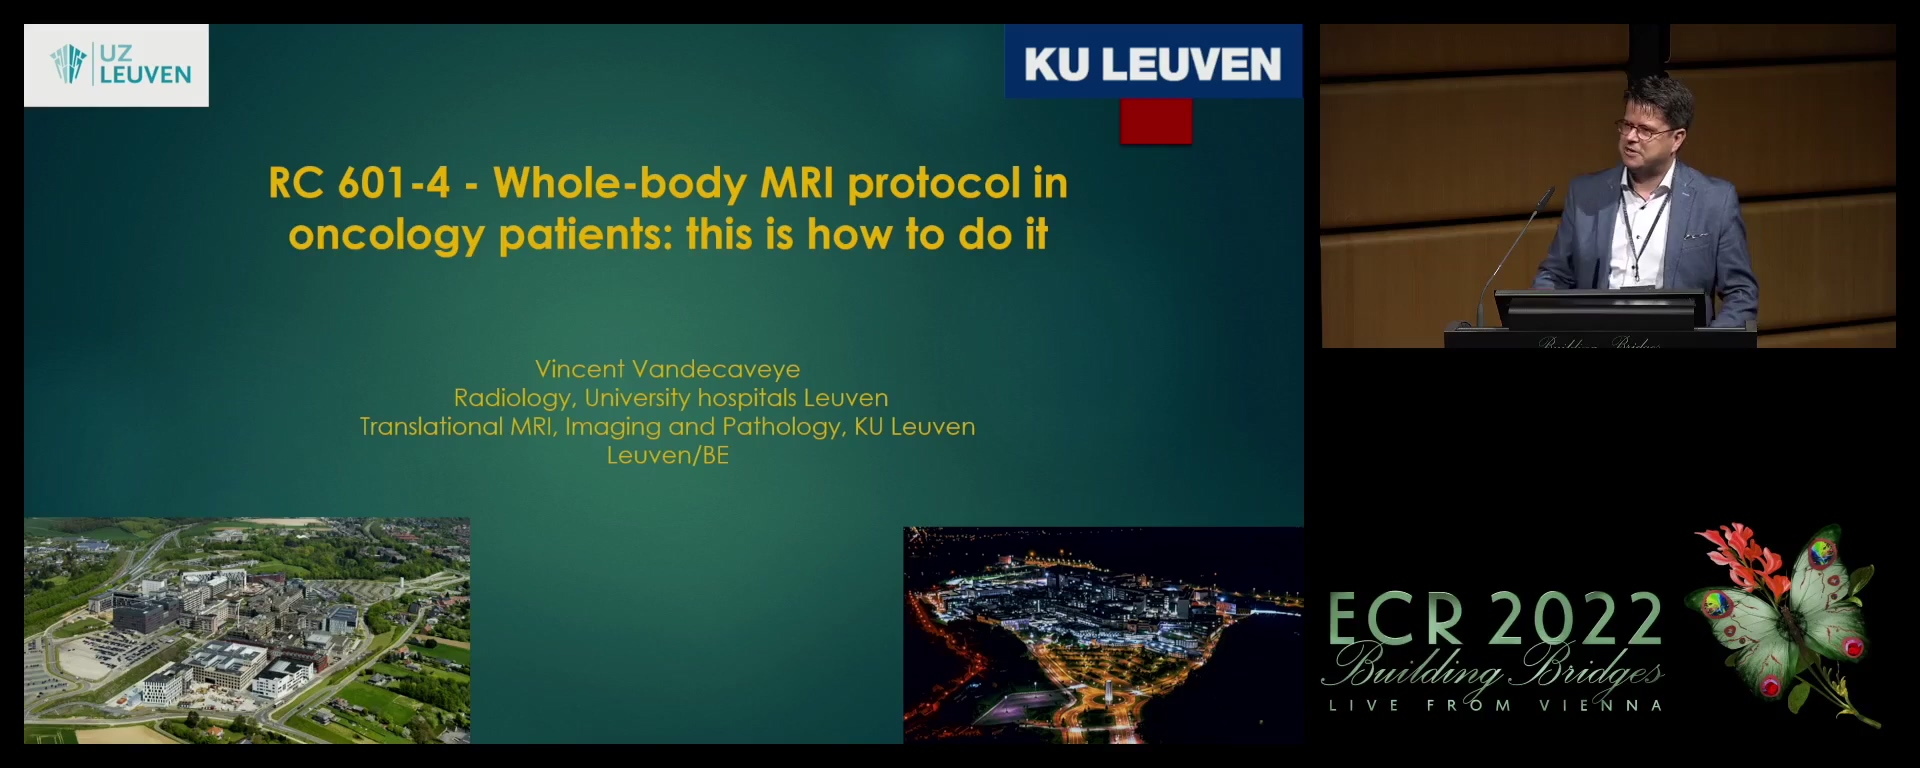 Whole-body MRI protocol in oncology patients: this is how to do it